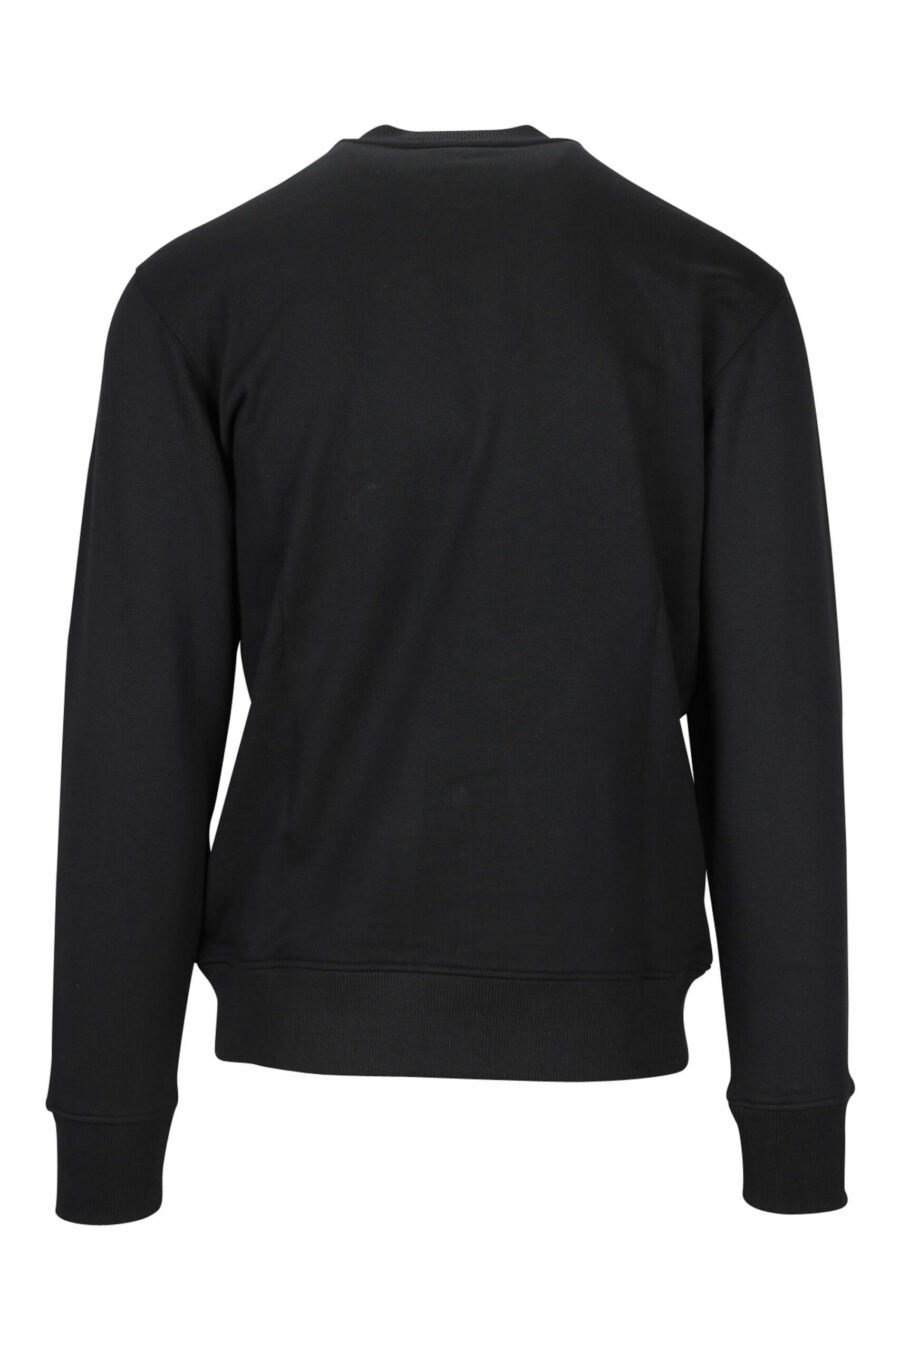 Black sweatshirt with classic maxilogue in shiny gold - 8052019456998 1 scaled